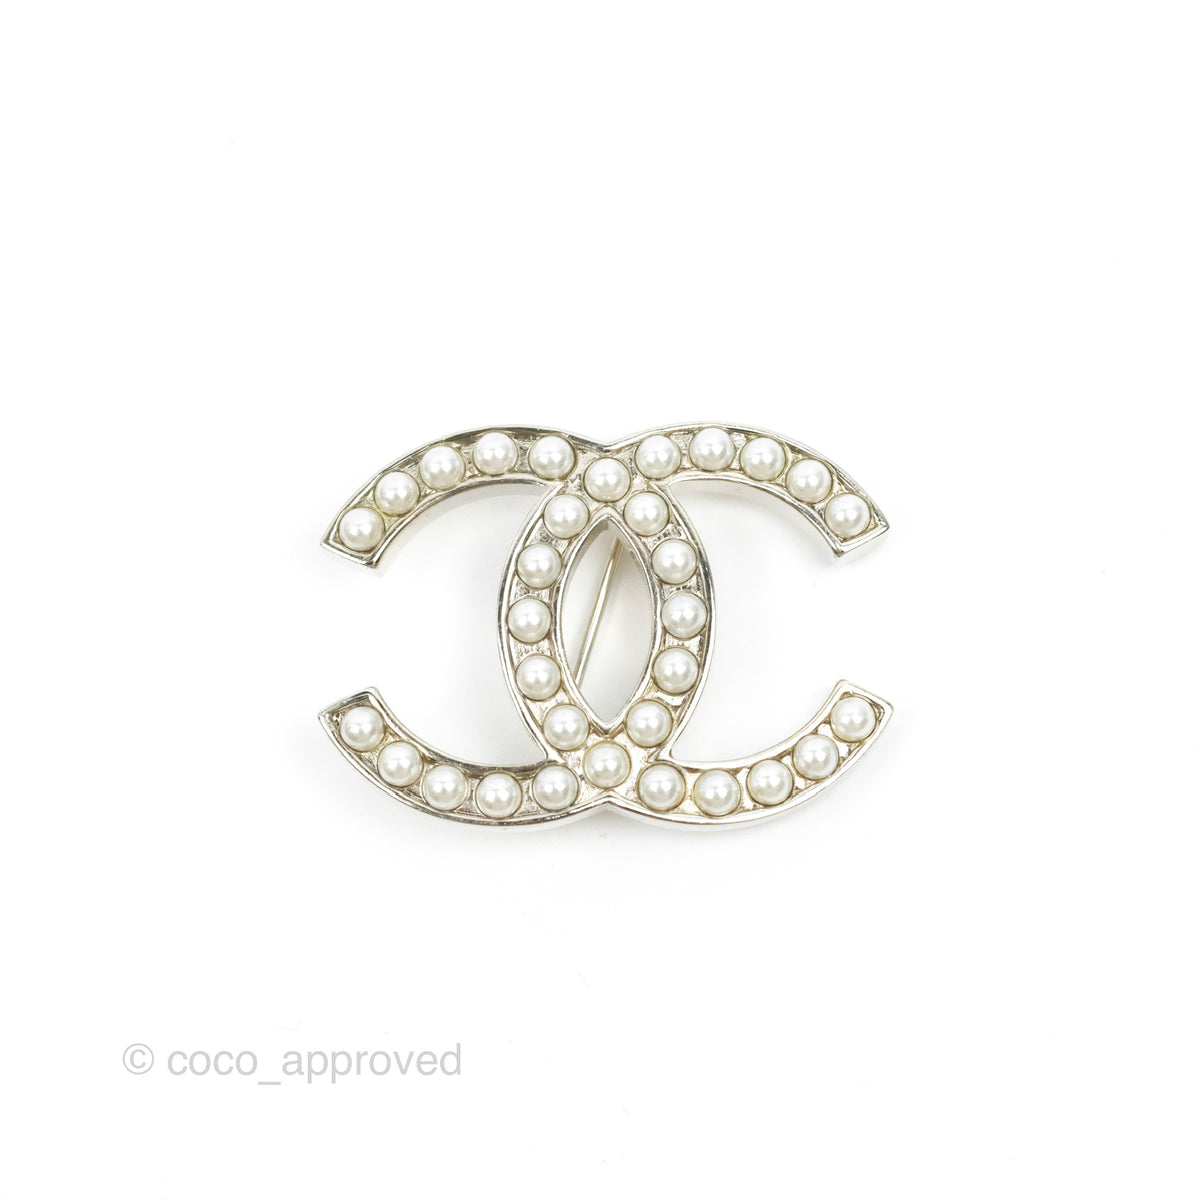 Chanel CC Cambon Pearl Crystal Brooch Gold Tone 21A – Coco Approved Studio